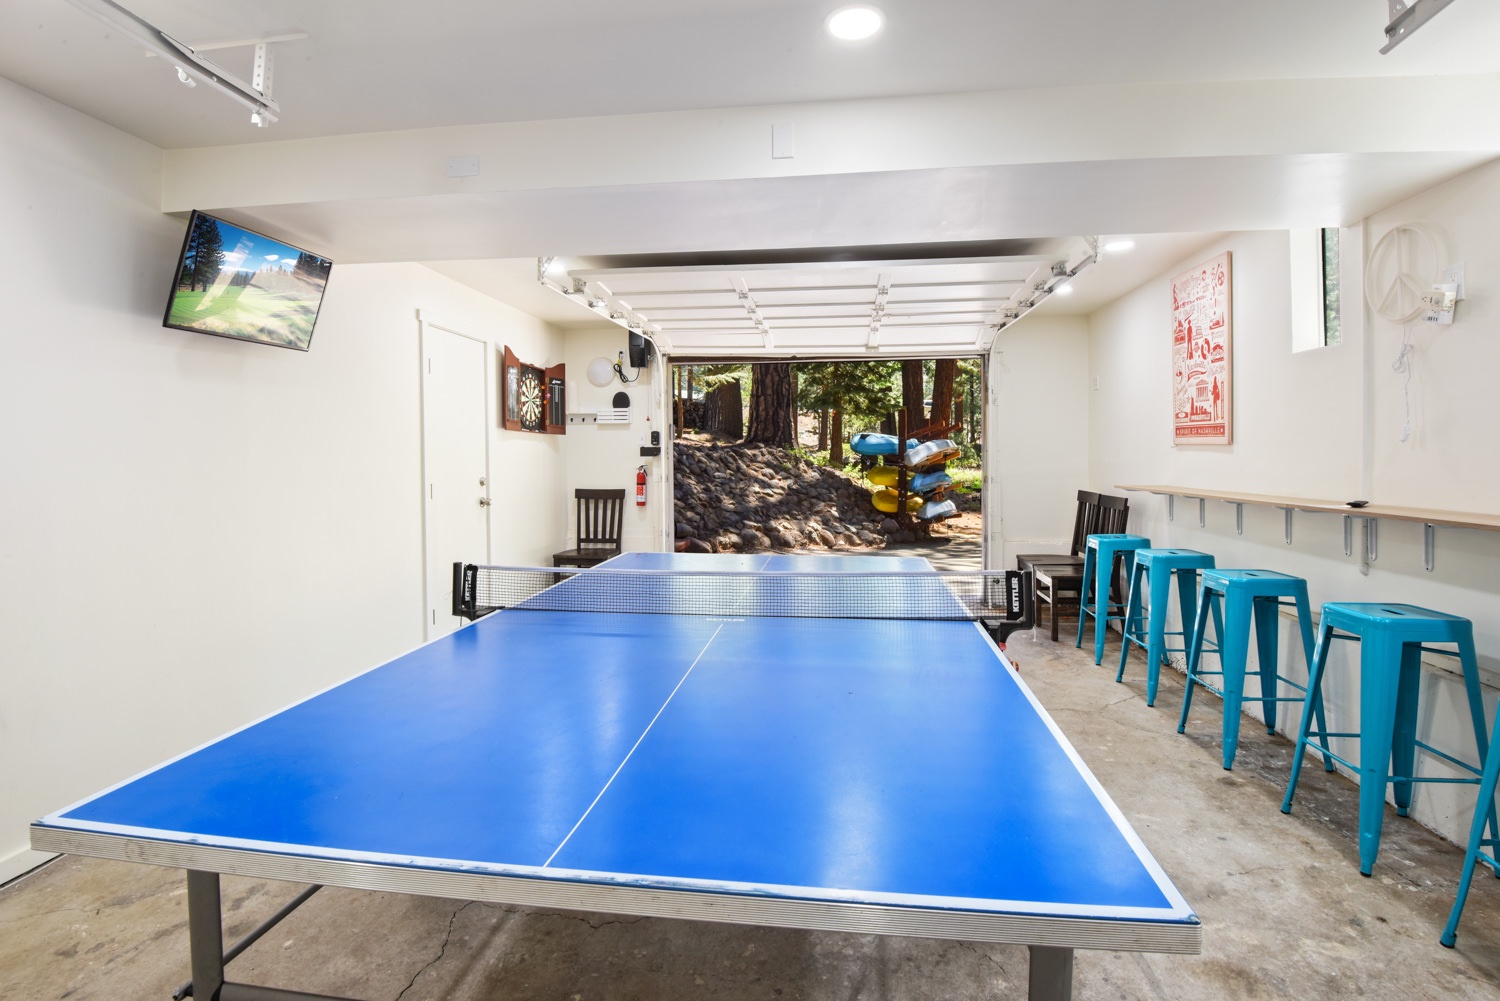 Garage features a ping pong table